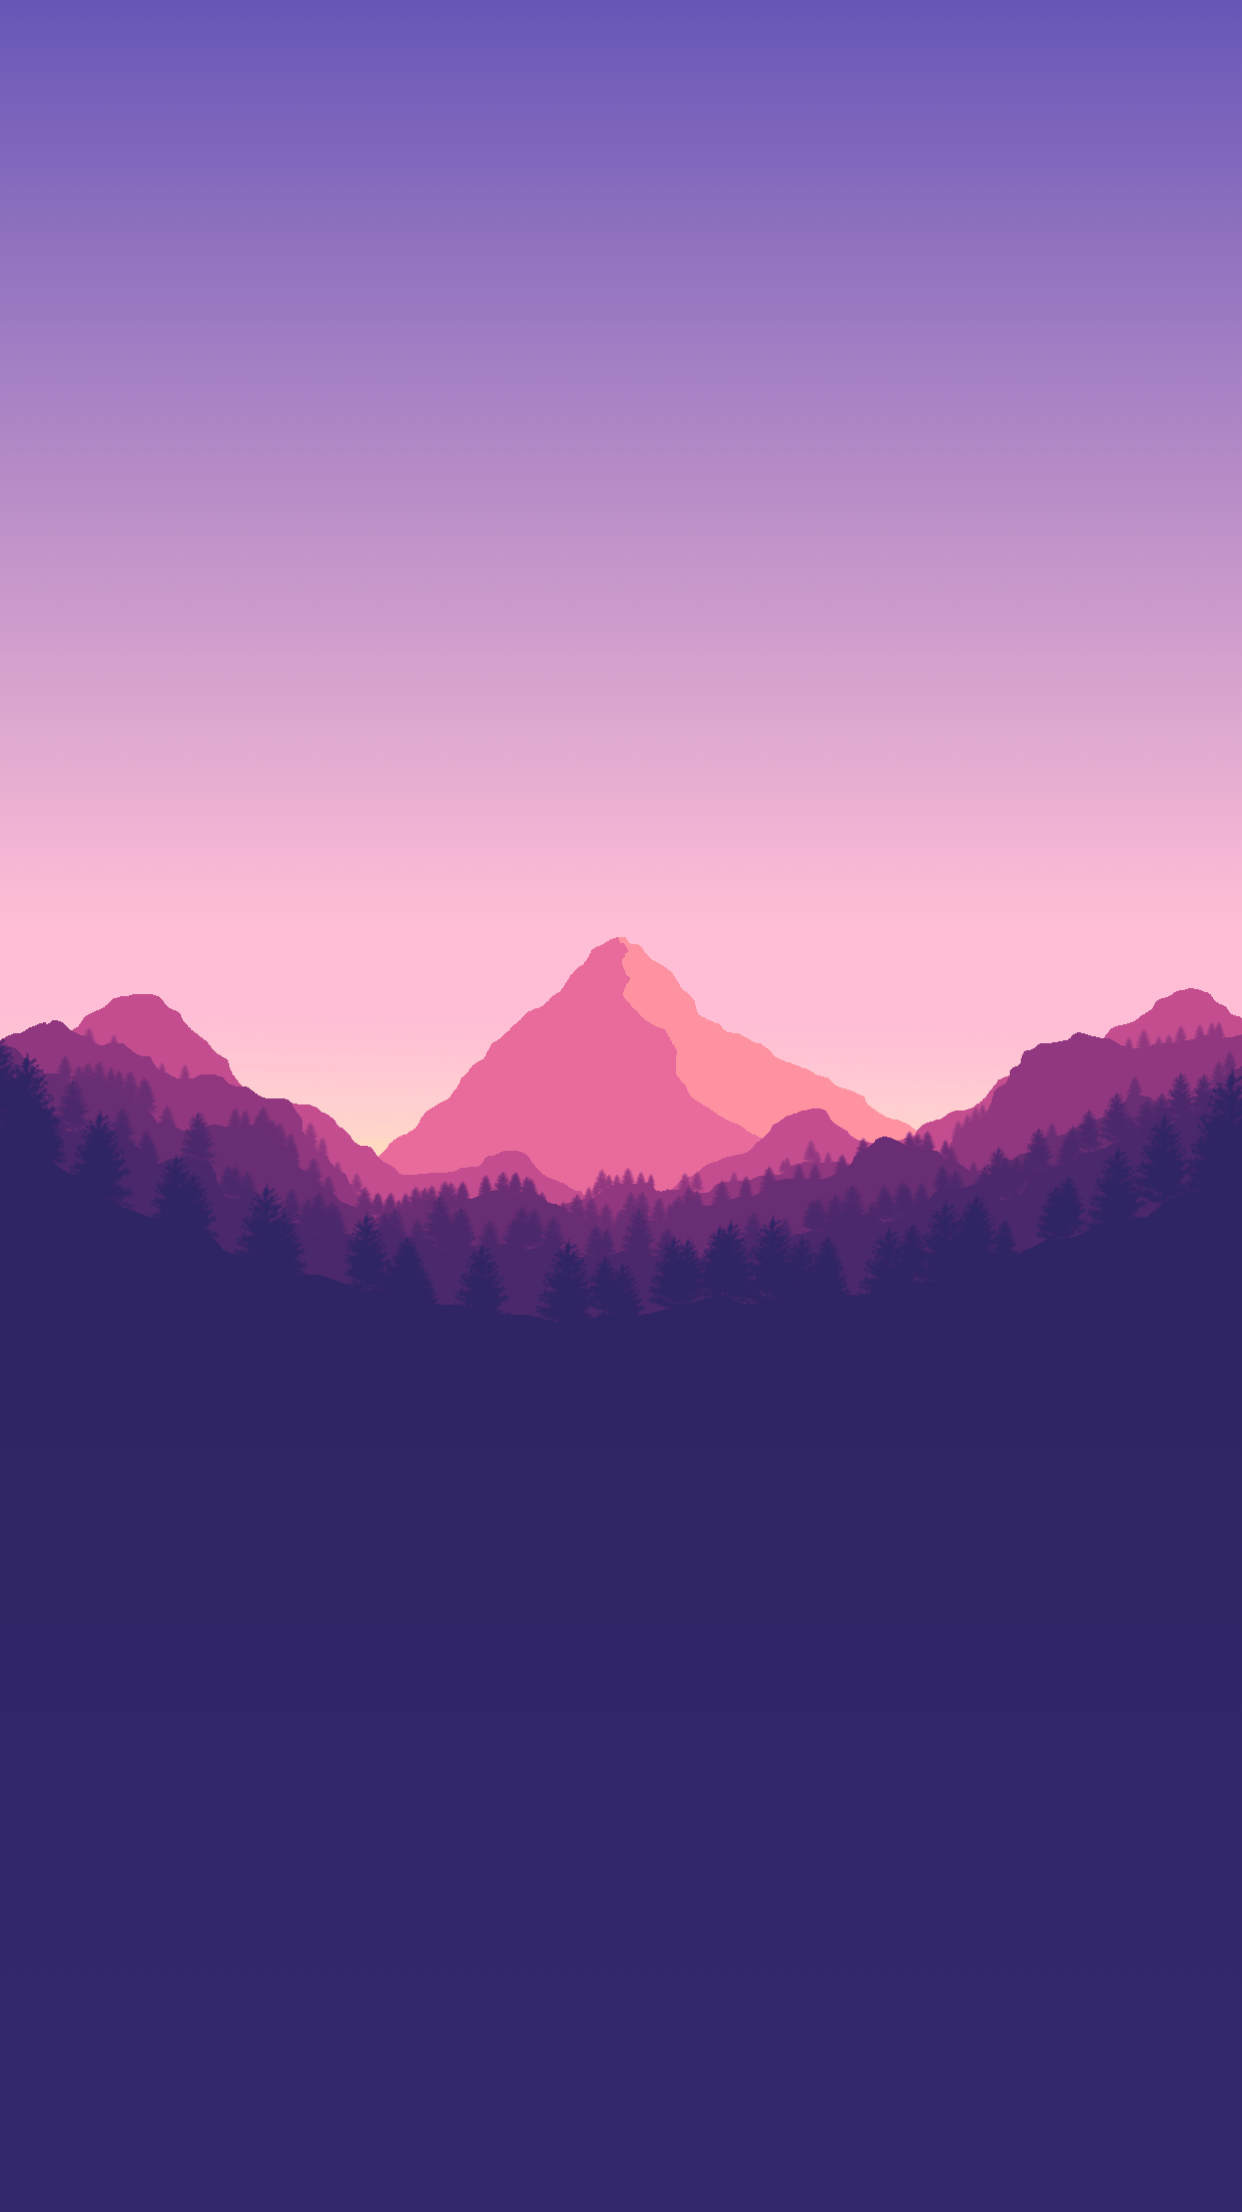 Download Minecraft Aesthetic Purple Lake Mountain Wallpaper | Wallpapers.com